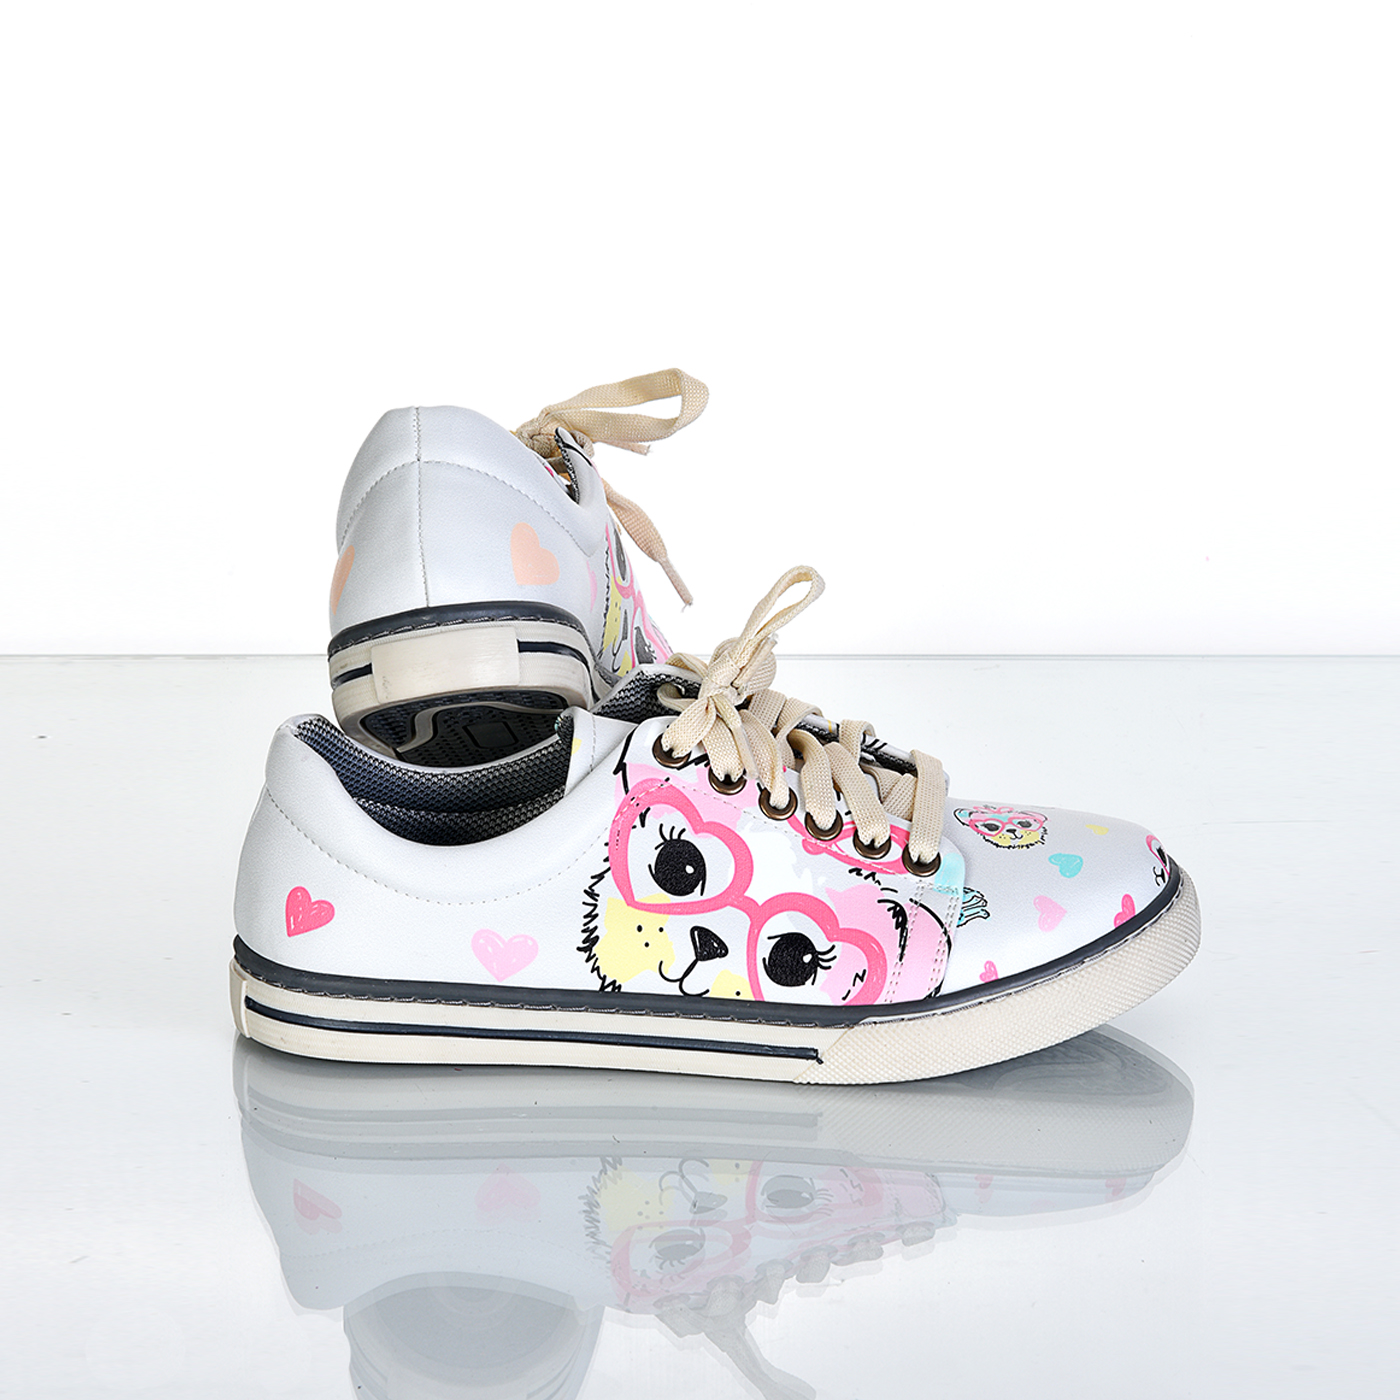 GOGGED DOG PATTERN SPECIAL DESIGN WOMEN'S SNEAKERS